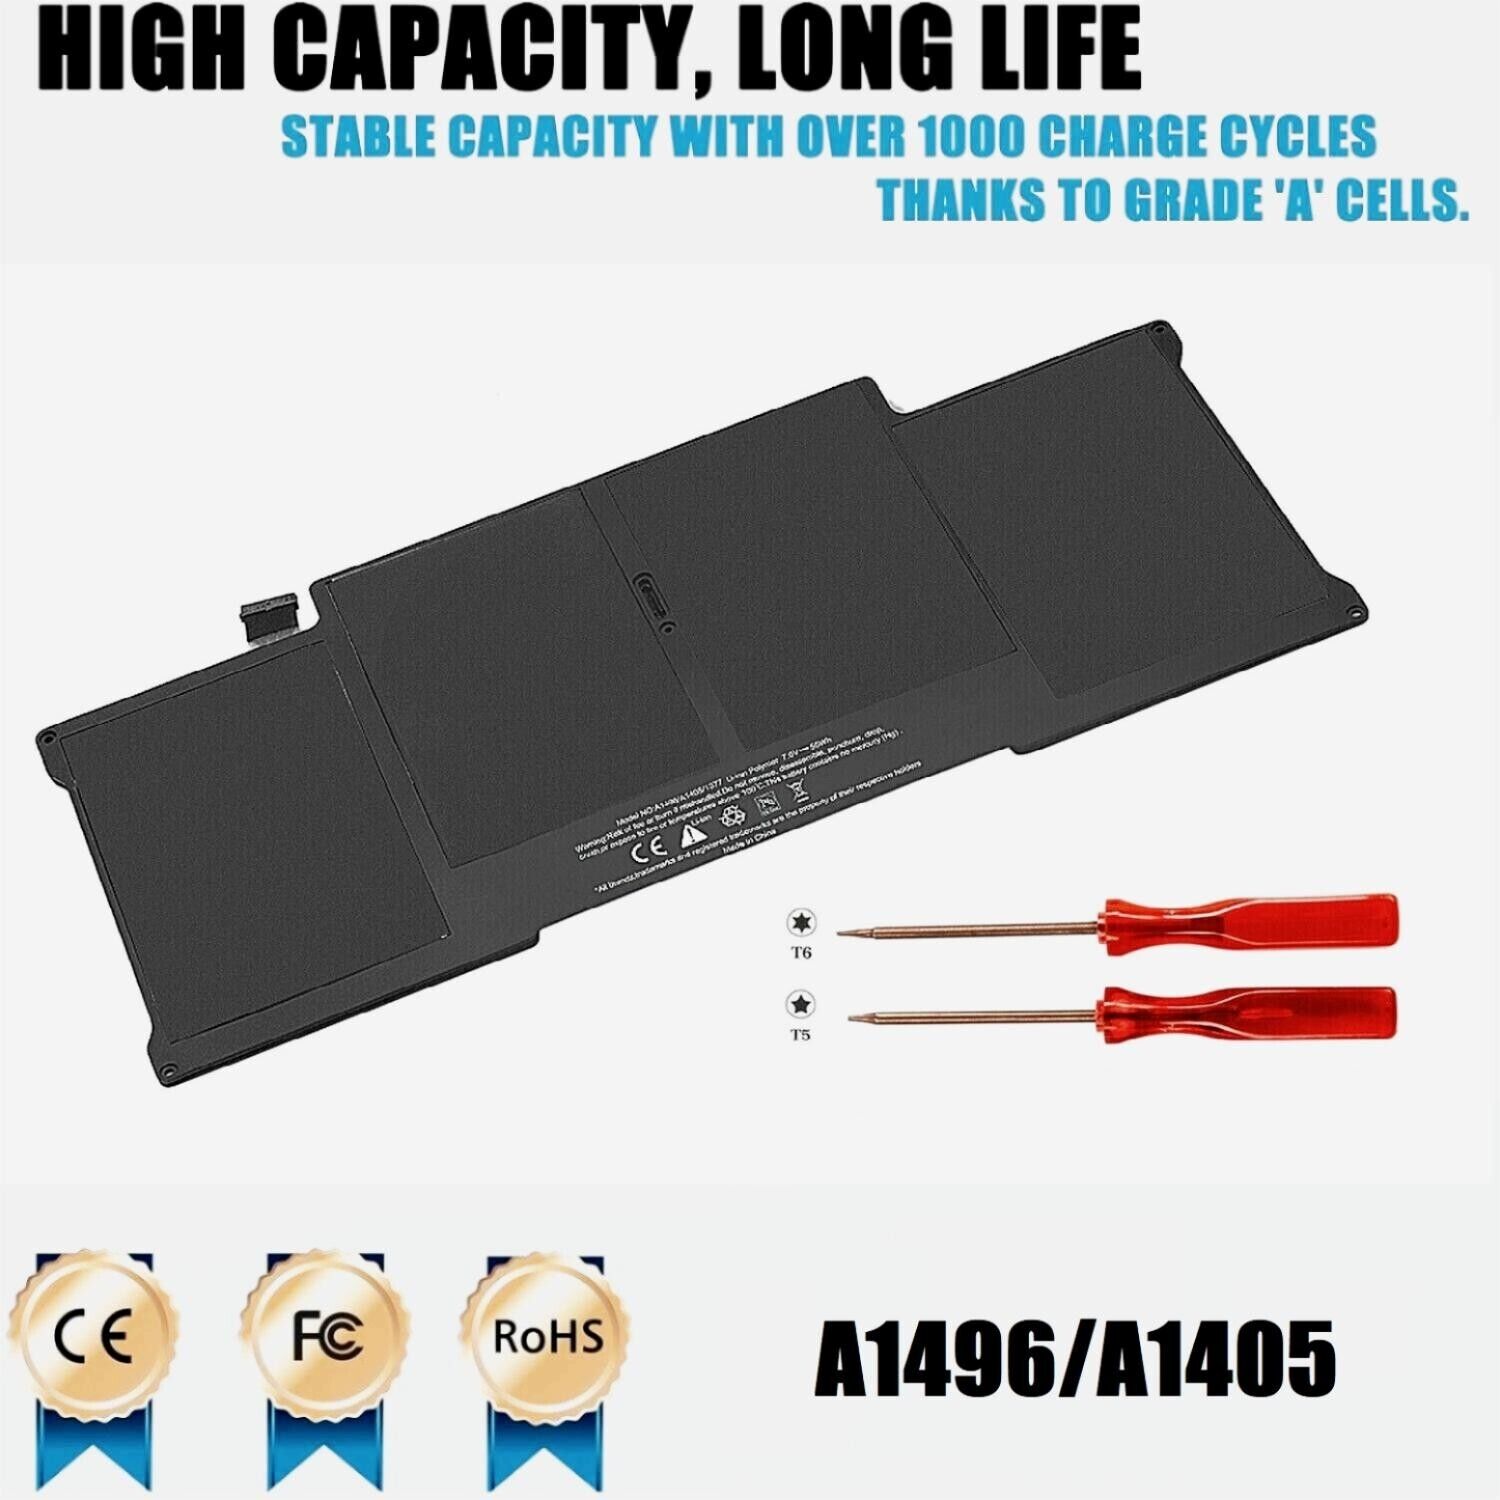 55Wh 🧡A1496 A1405 Battery For Apple Macbook Air 13'' A1466 2013 2014 2015 2017